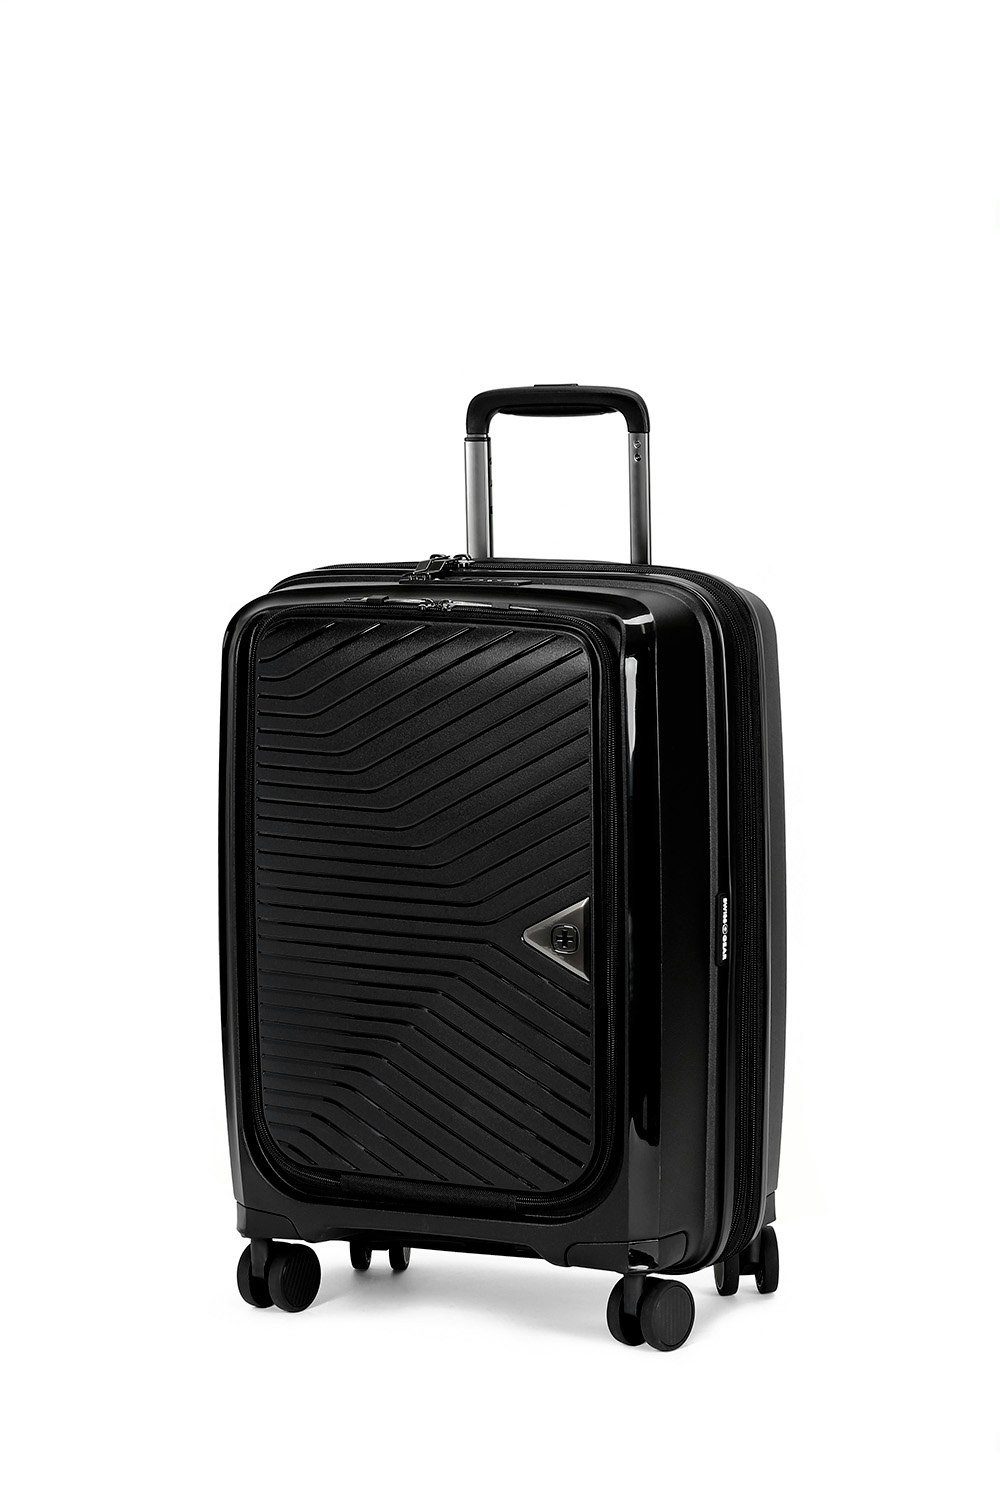 SwissGear Geneva 20 Expandable Dual-Spinner Carry-On Luggage 